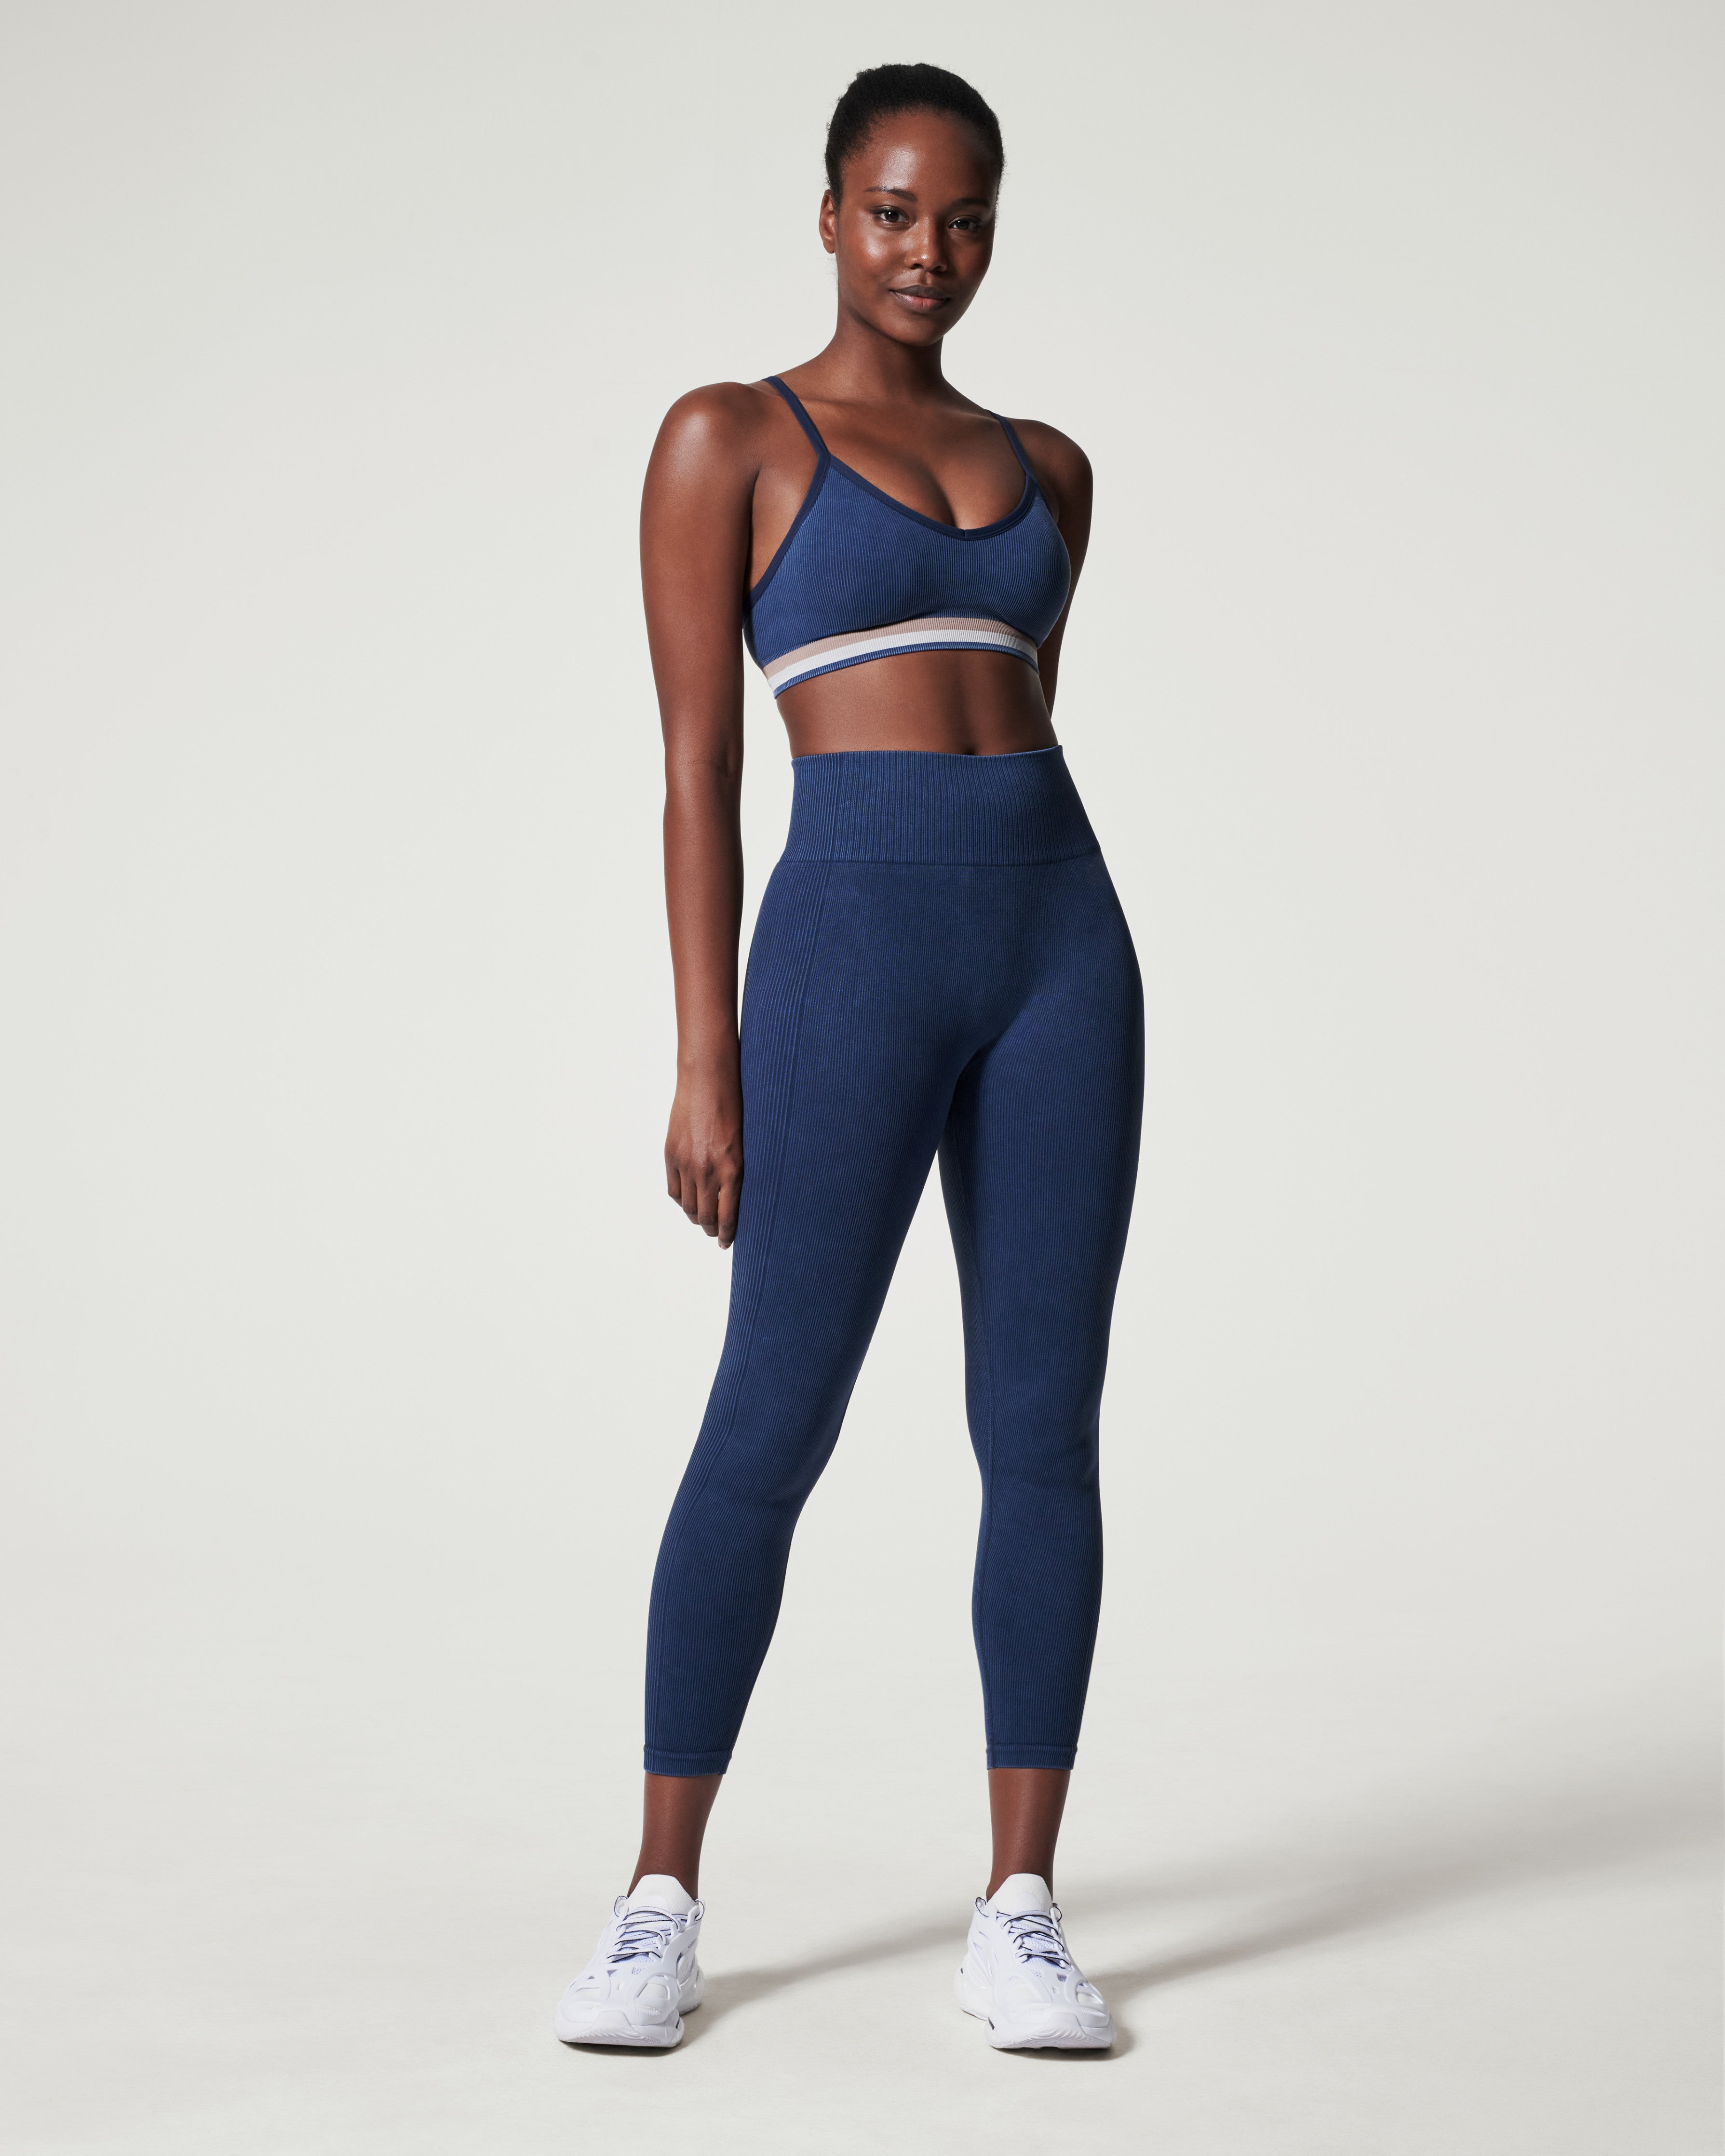 Spanx sale: Save big on leggings, shapewear and more